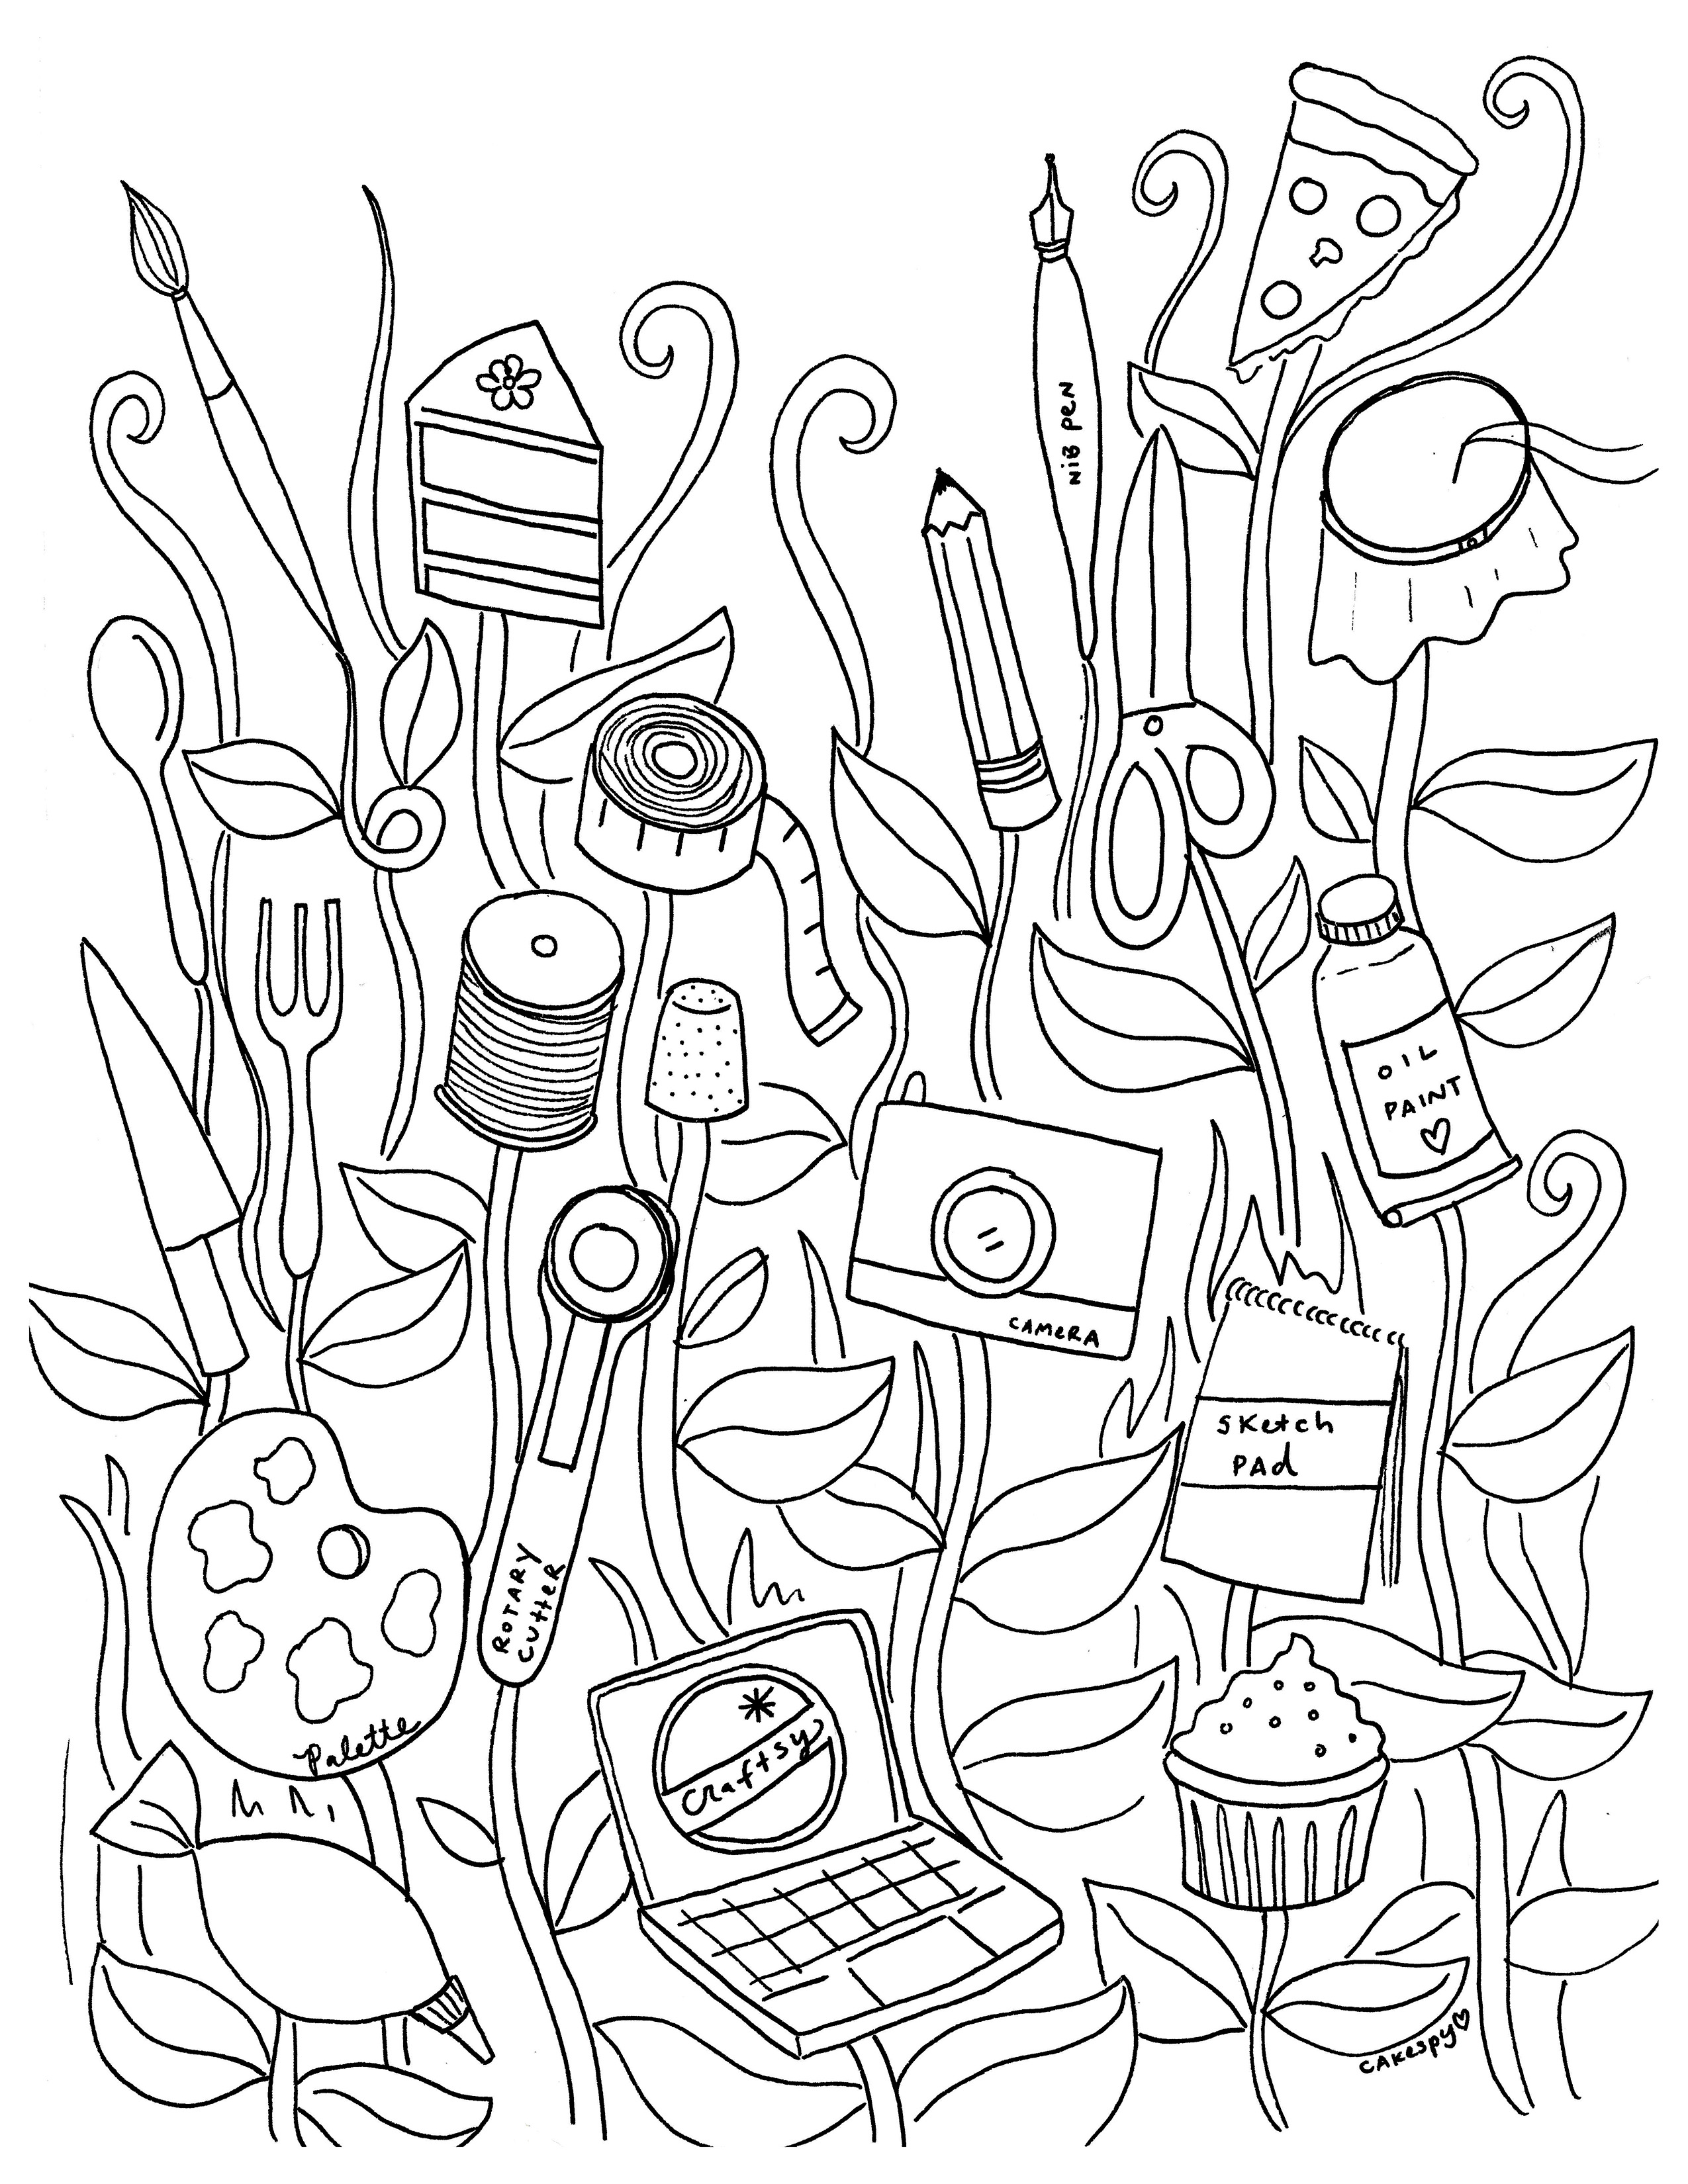 Adult Coloring Book Pages